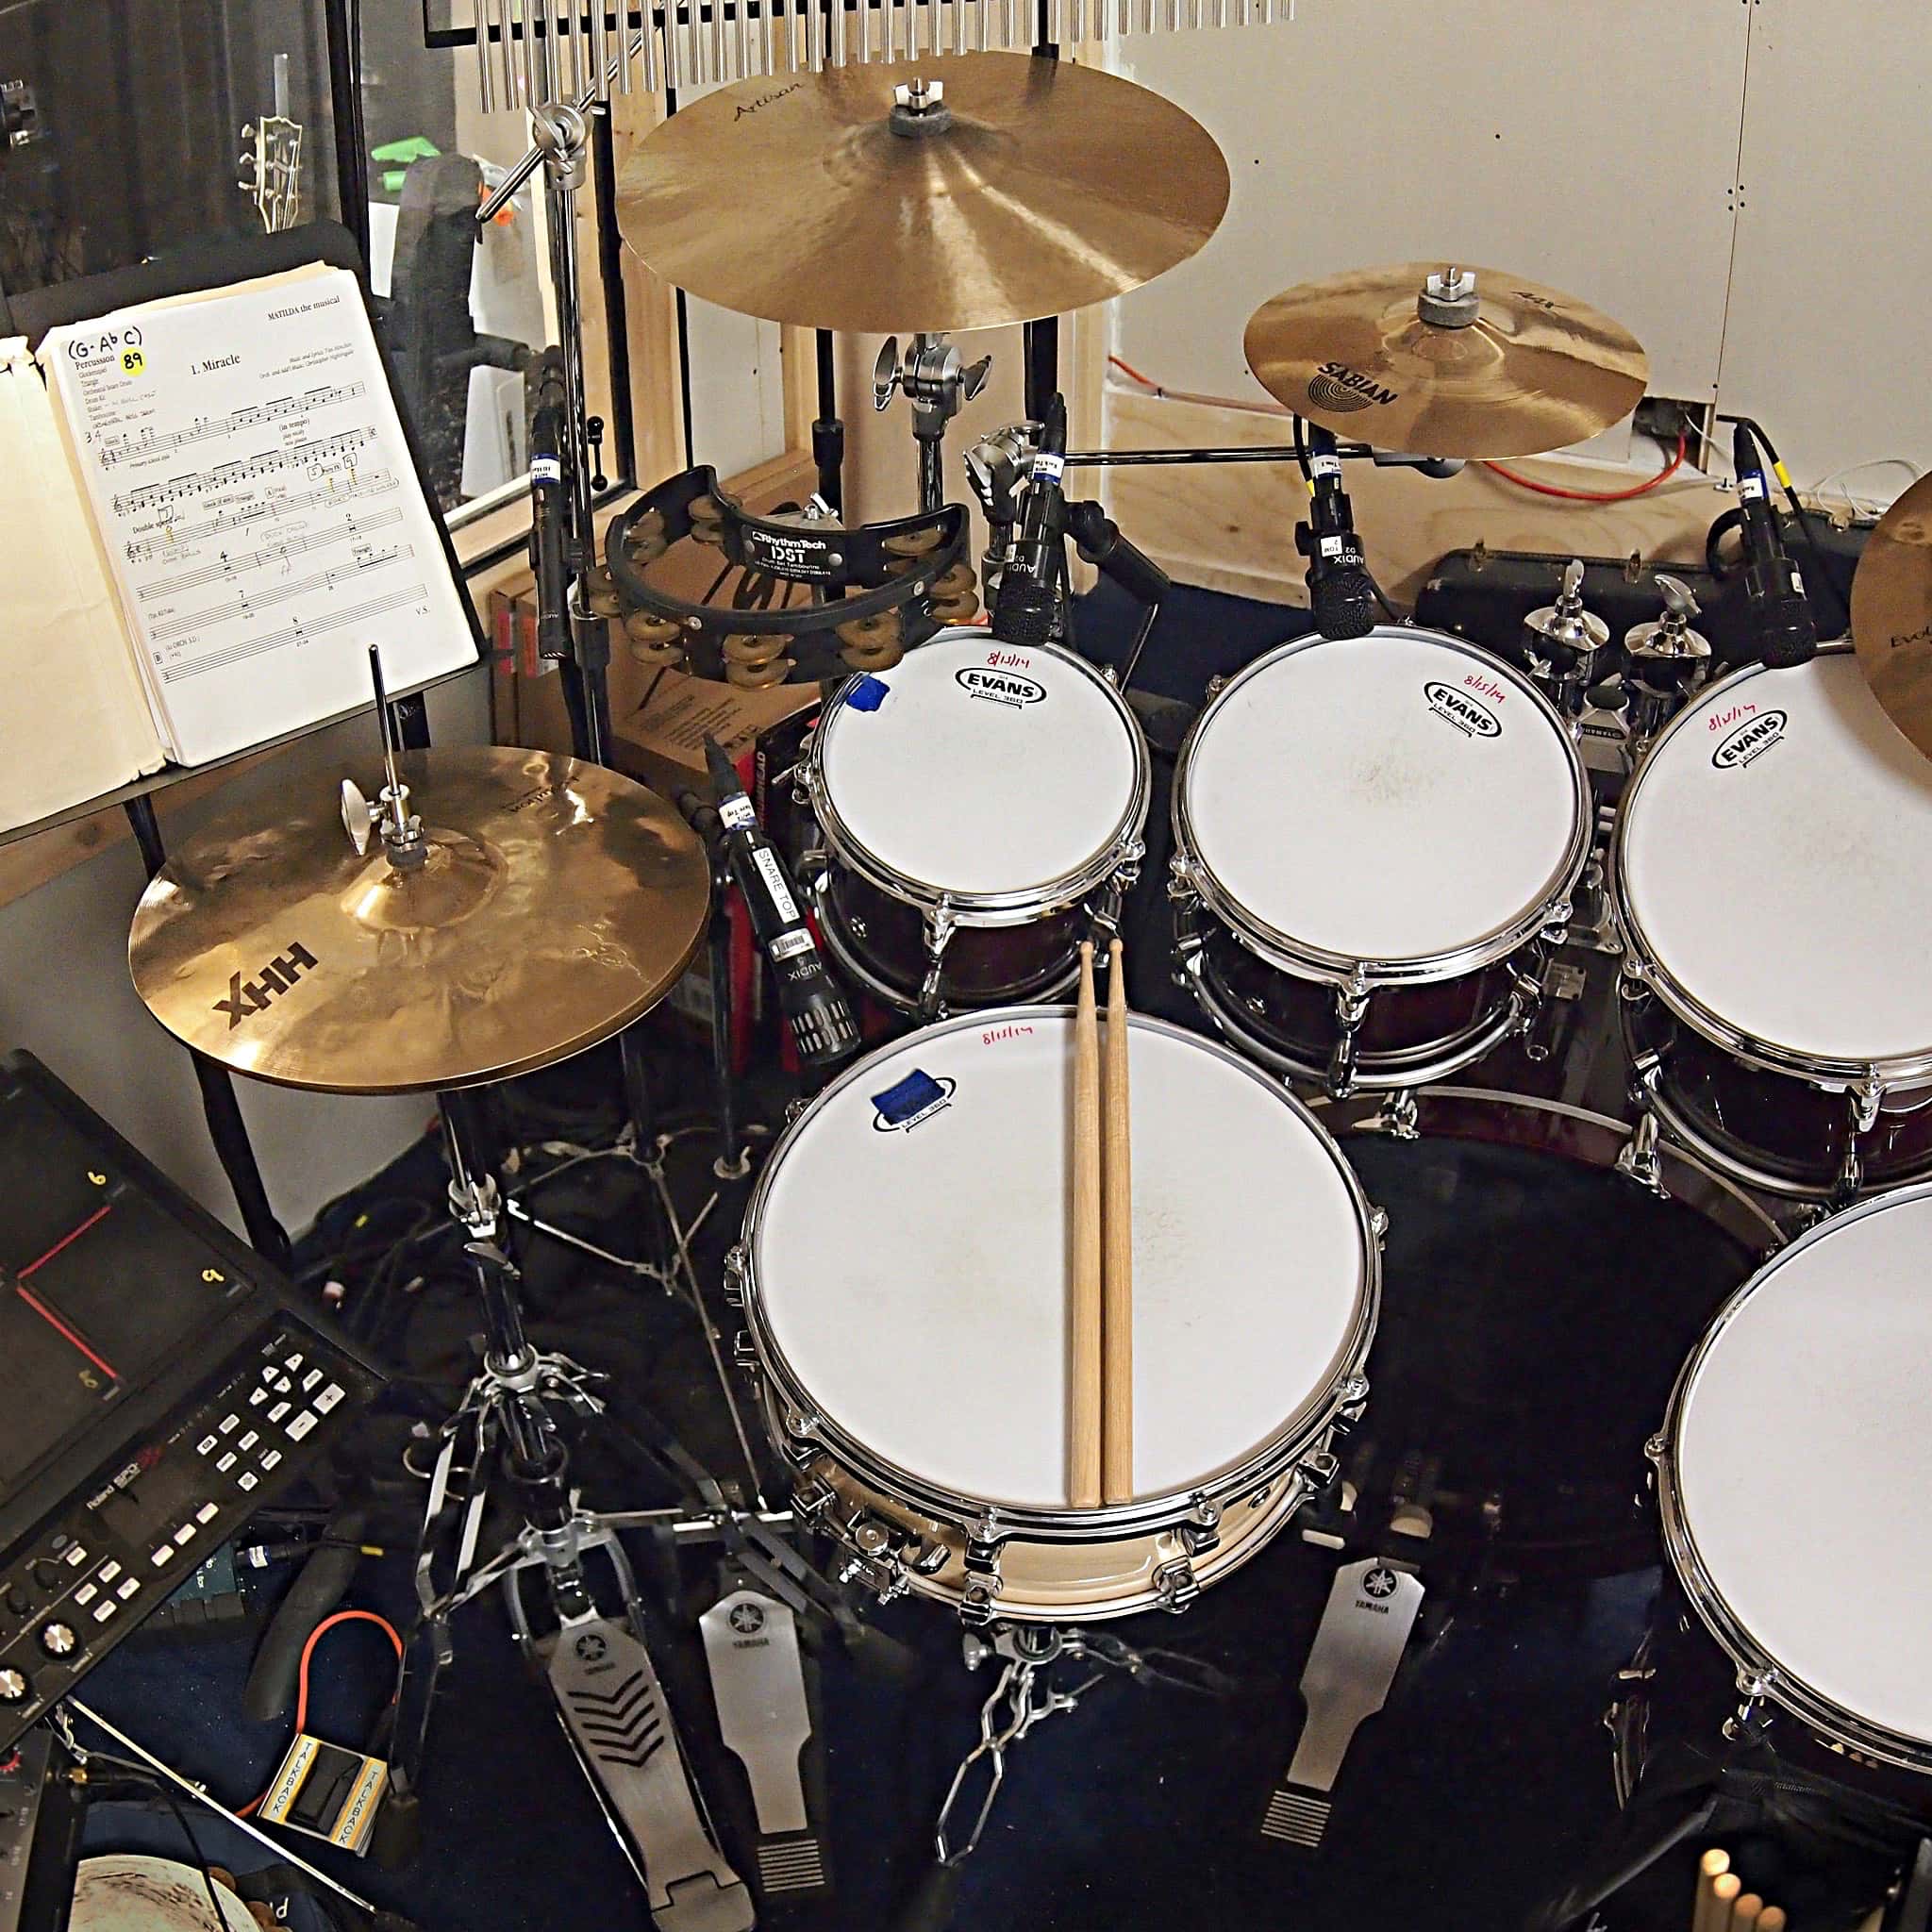 Howard Joines' setup for the Broadway production of Matilda at the Shubert Theater.